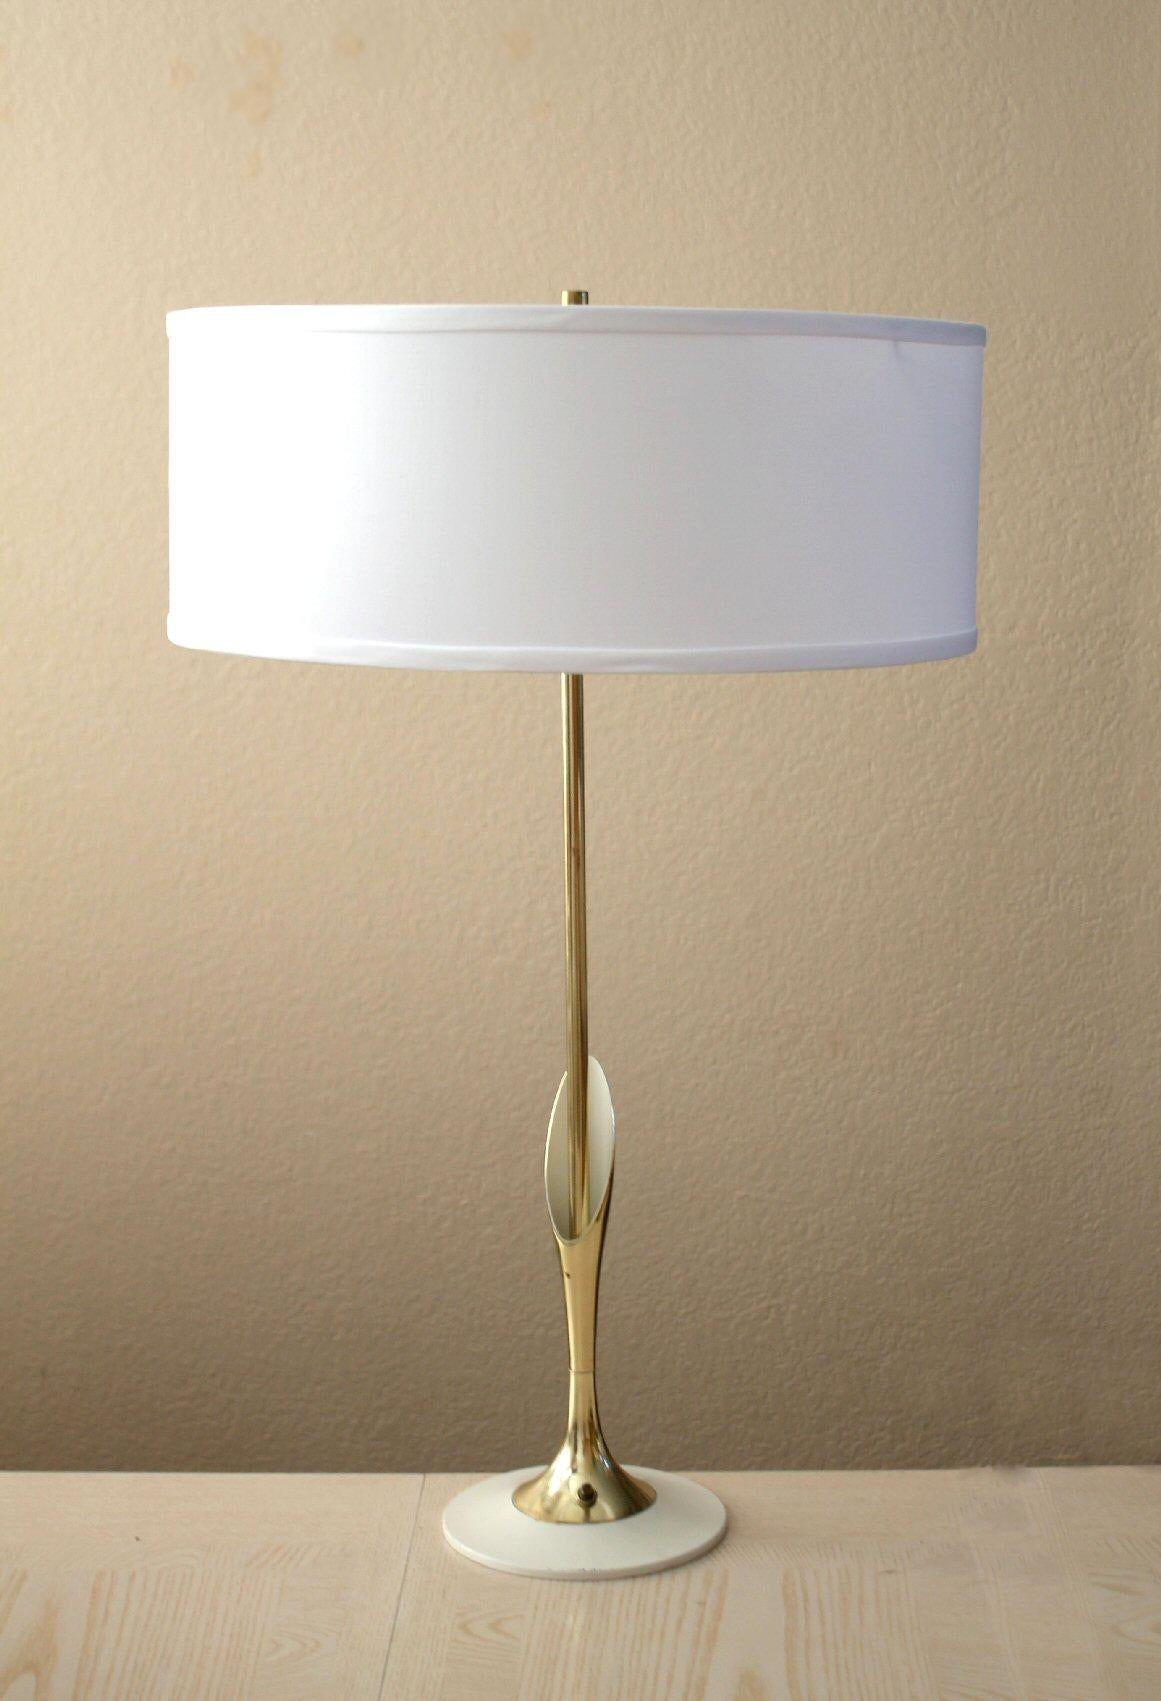 Gorgeous!

Bespoke Laurel Lamp
Mid Century Modern
Brass and White Enameled Metal

Incredibly Clean Design!

Attributed to Richard Barr

This is a marvelous Laurel Table Lamp with brass and white enameled metal following their traditional abstract